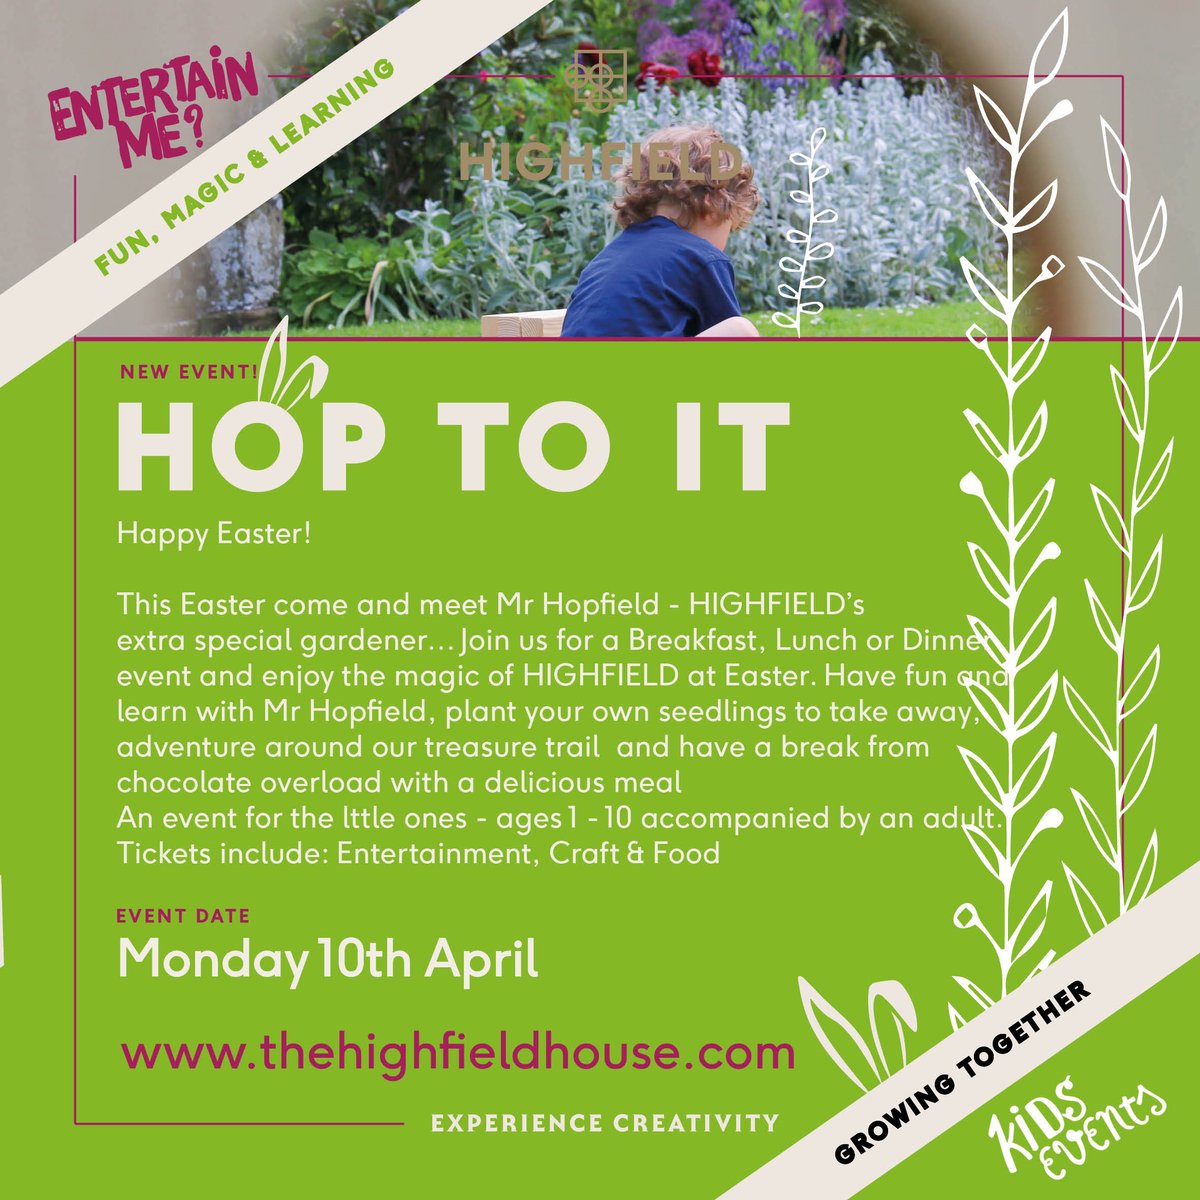 It's time to HOP TO IT HIGHFIELD's first Kids Event of 2023 is NOW ON SALE Join us and Gardener Hopfield for some springtime fun this Easter 🐣🌸🐰 #kids #event #kidsevent #hop #easter #gardener #springtimefun #easterkids